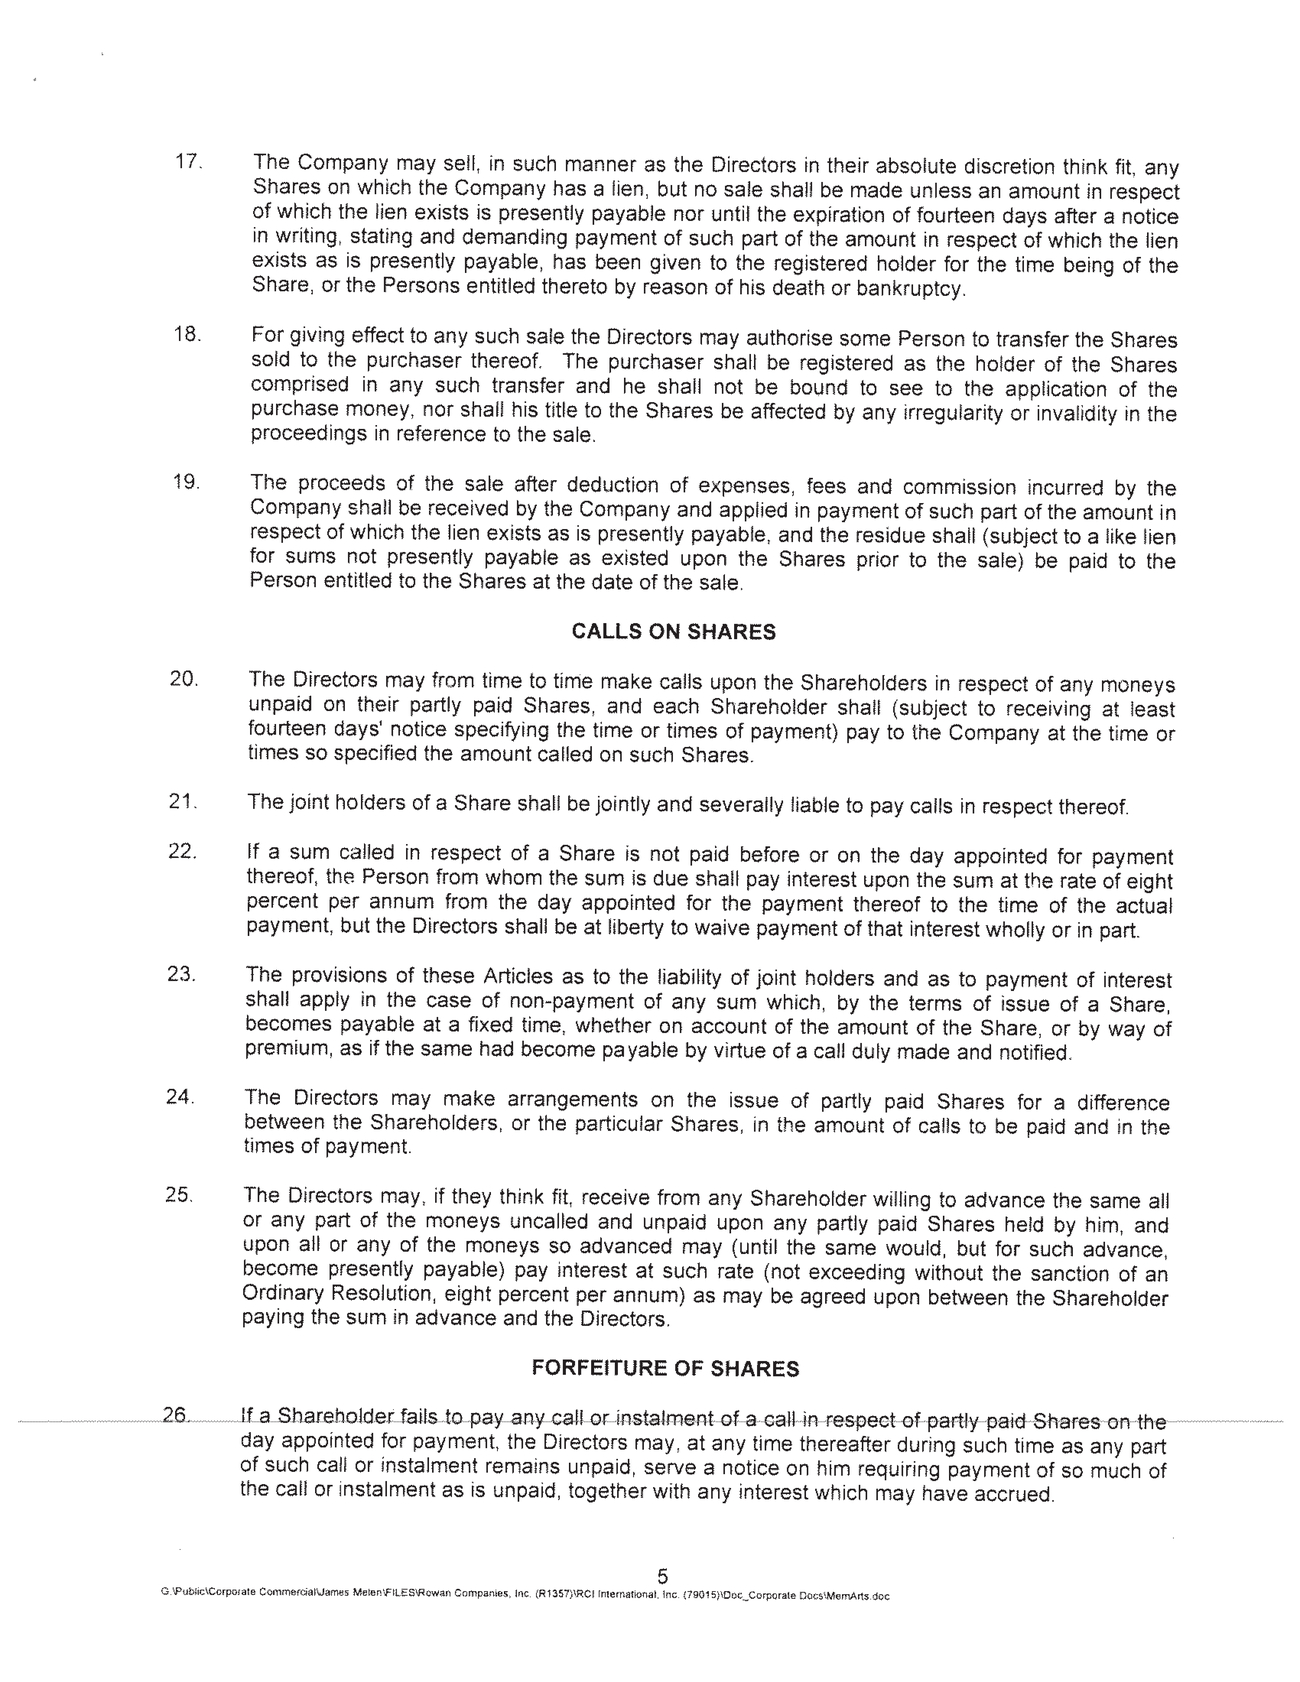 New Microsoft Word Document - Copy_page003page020page001 memorandum and articles of association of rci international inc_page010.jpg